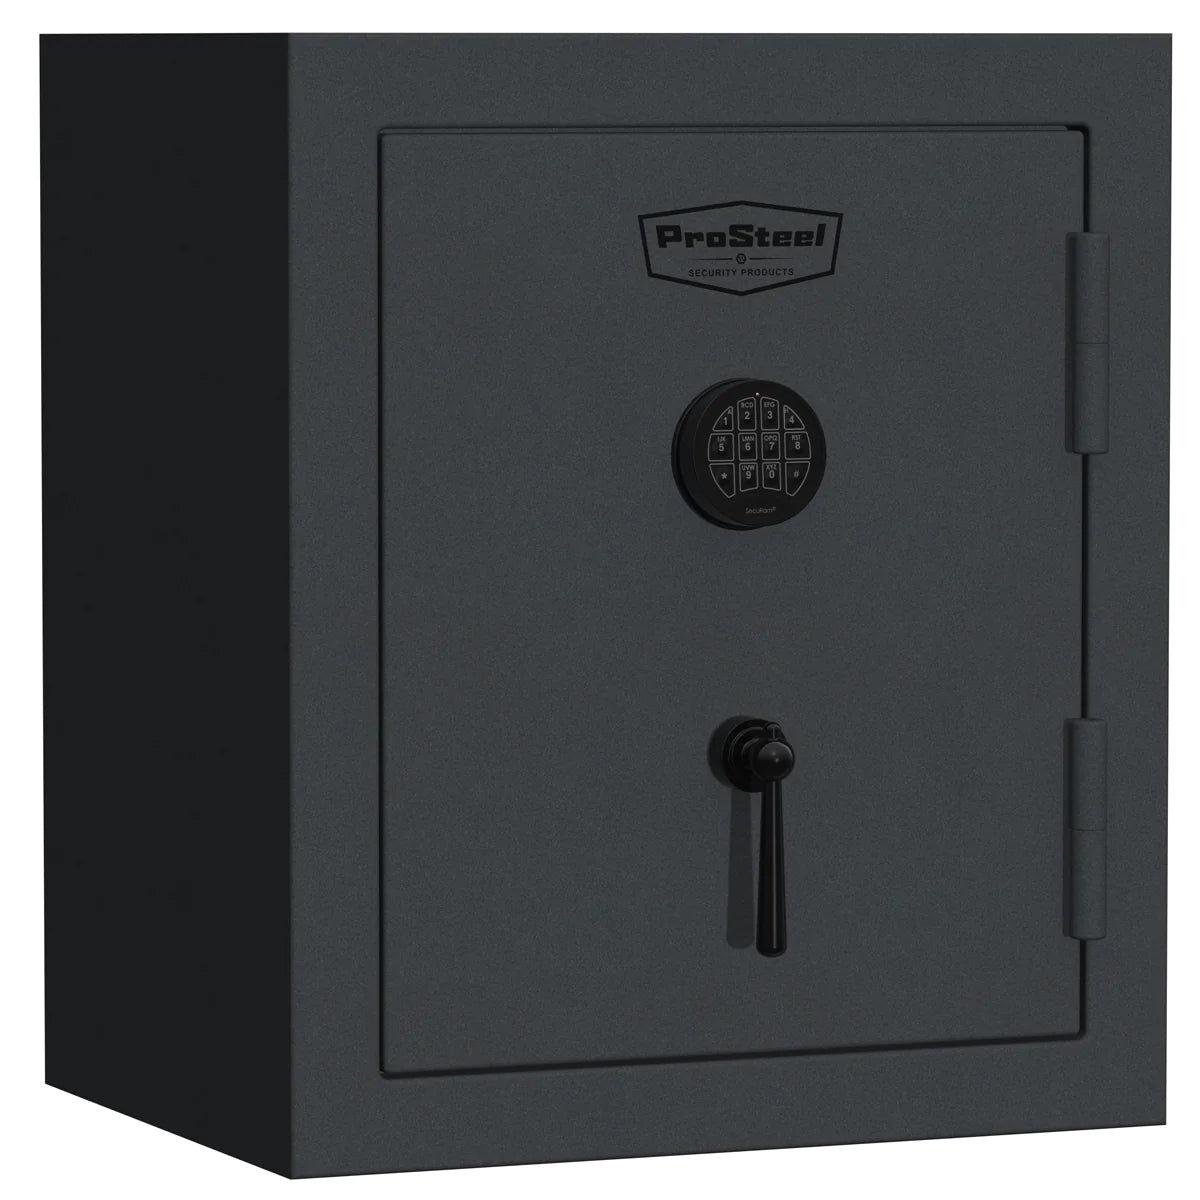 Browning PS9 Home Fireproof Safe